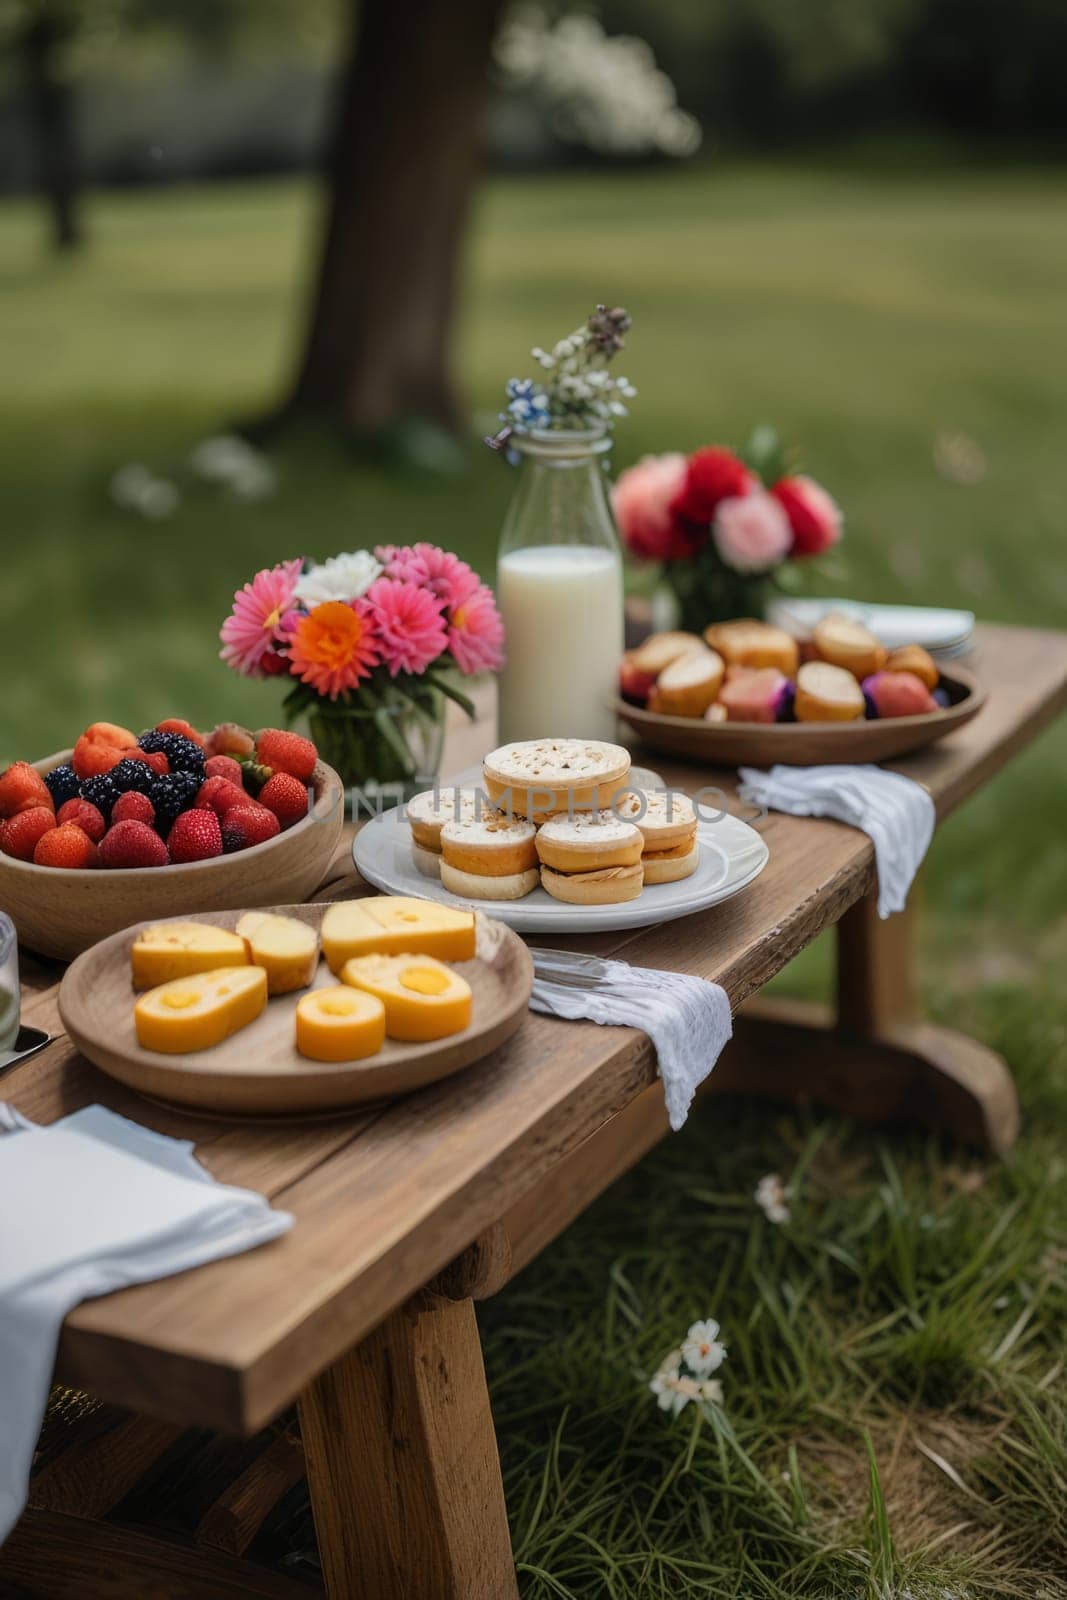 Indulge in a delectable outdoor brunch spread highlighting fresh dairy delights and vibrant blossoms, a feast for the senses.